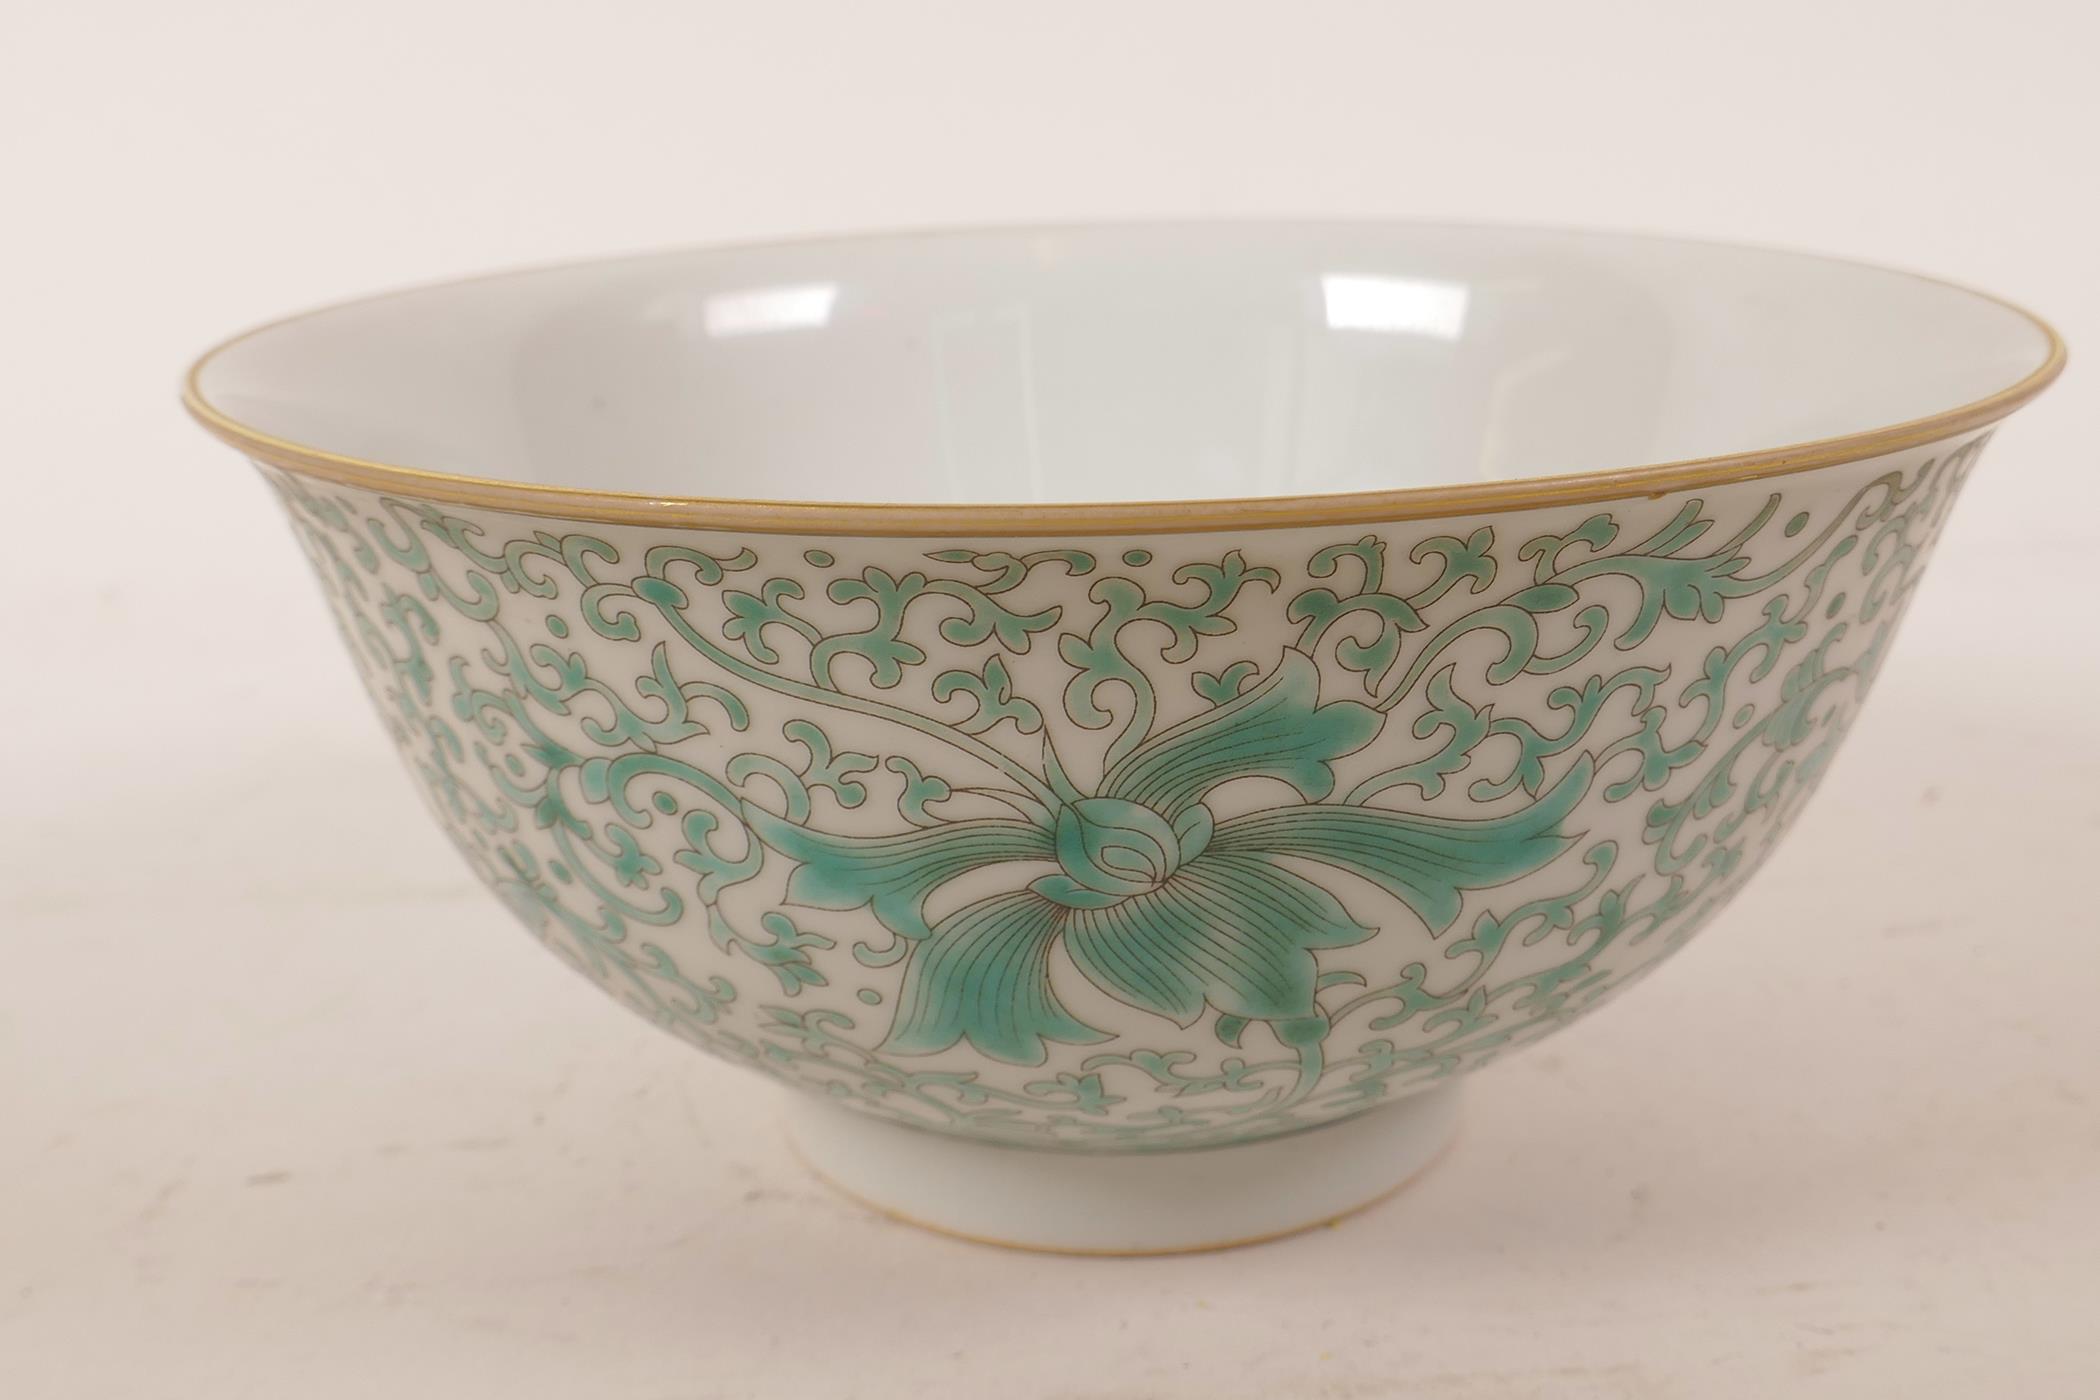 A Chinese porcelain rice bowl with green enamel scrolling lotus flower decoration, 6 character